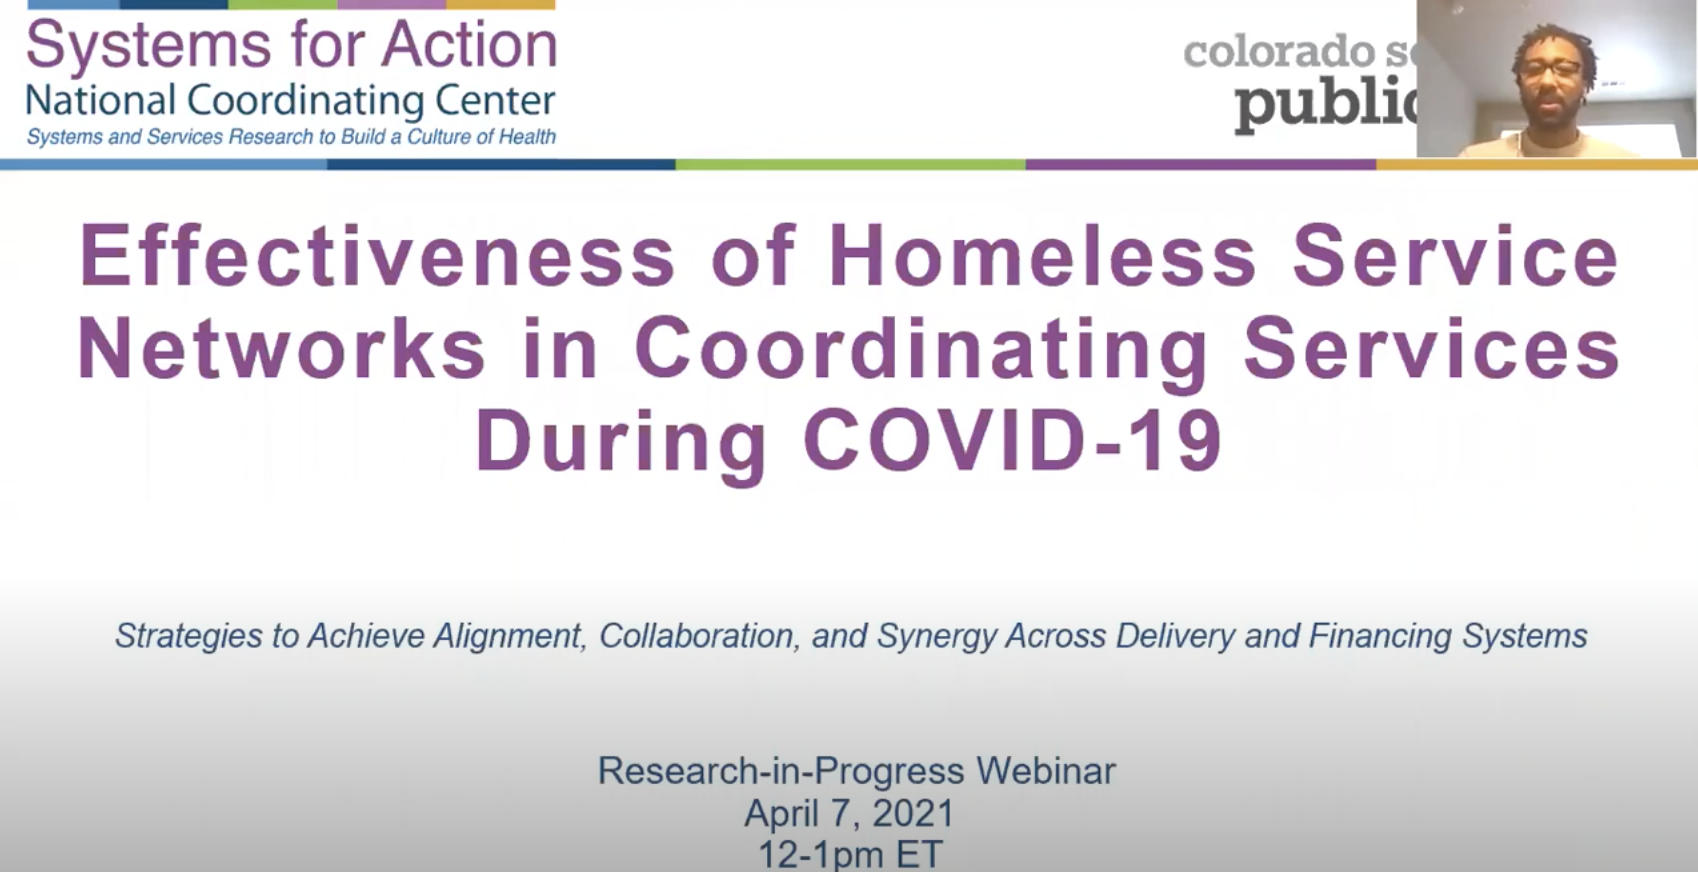 Effectiveness of Homeless Service Networks in Coordinating Services during COVID-19